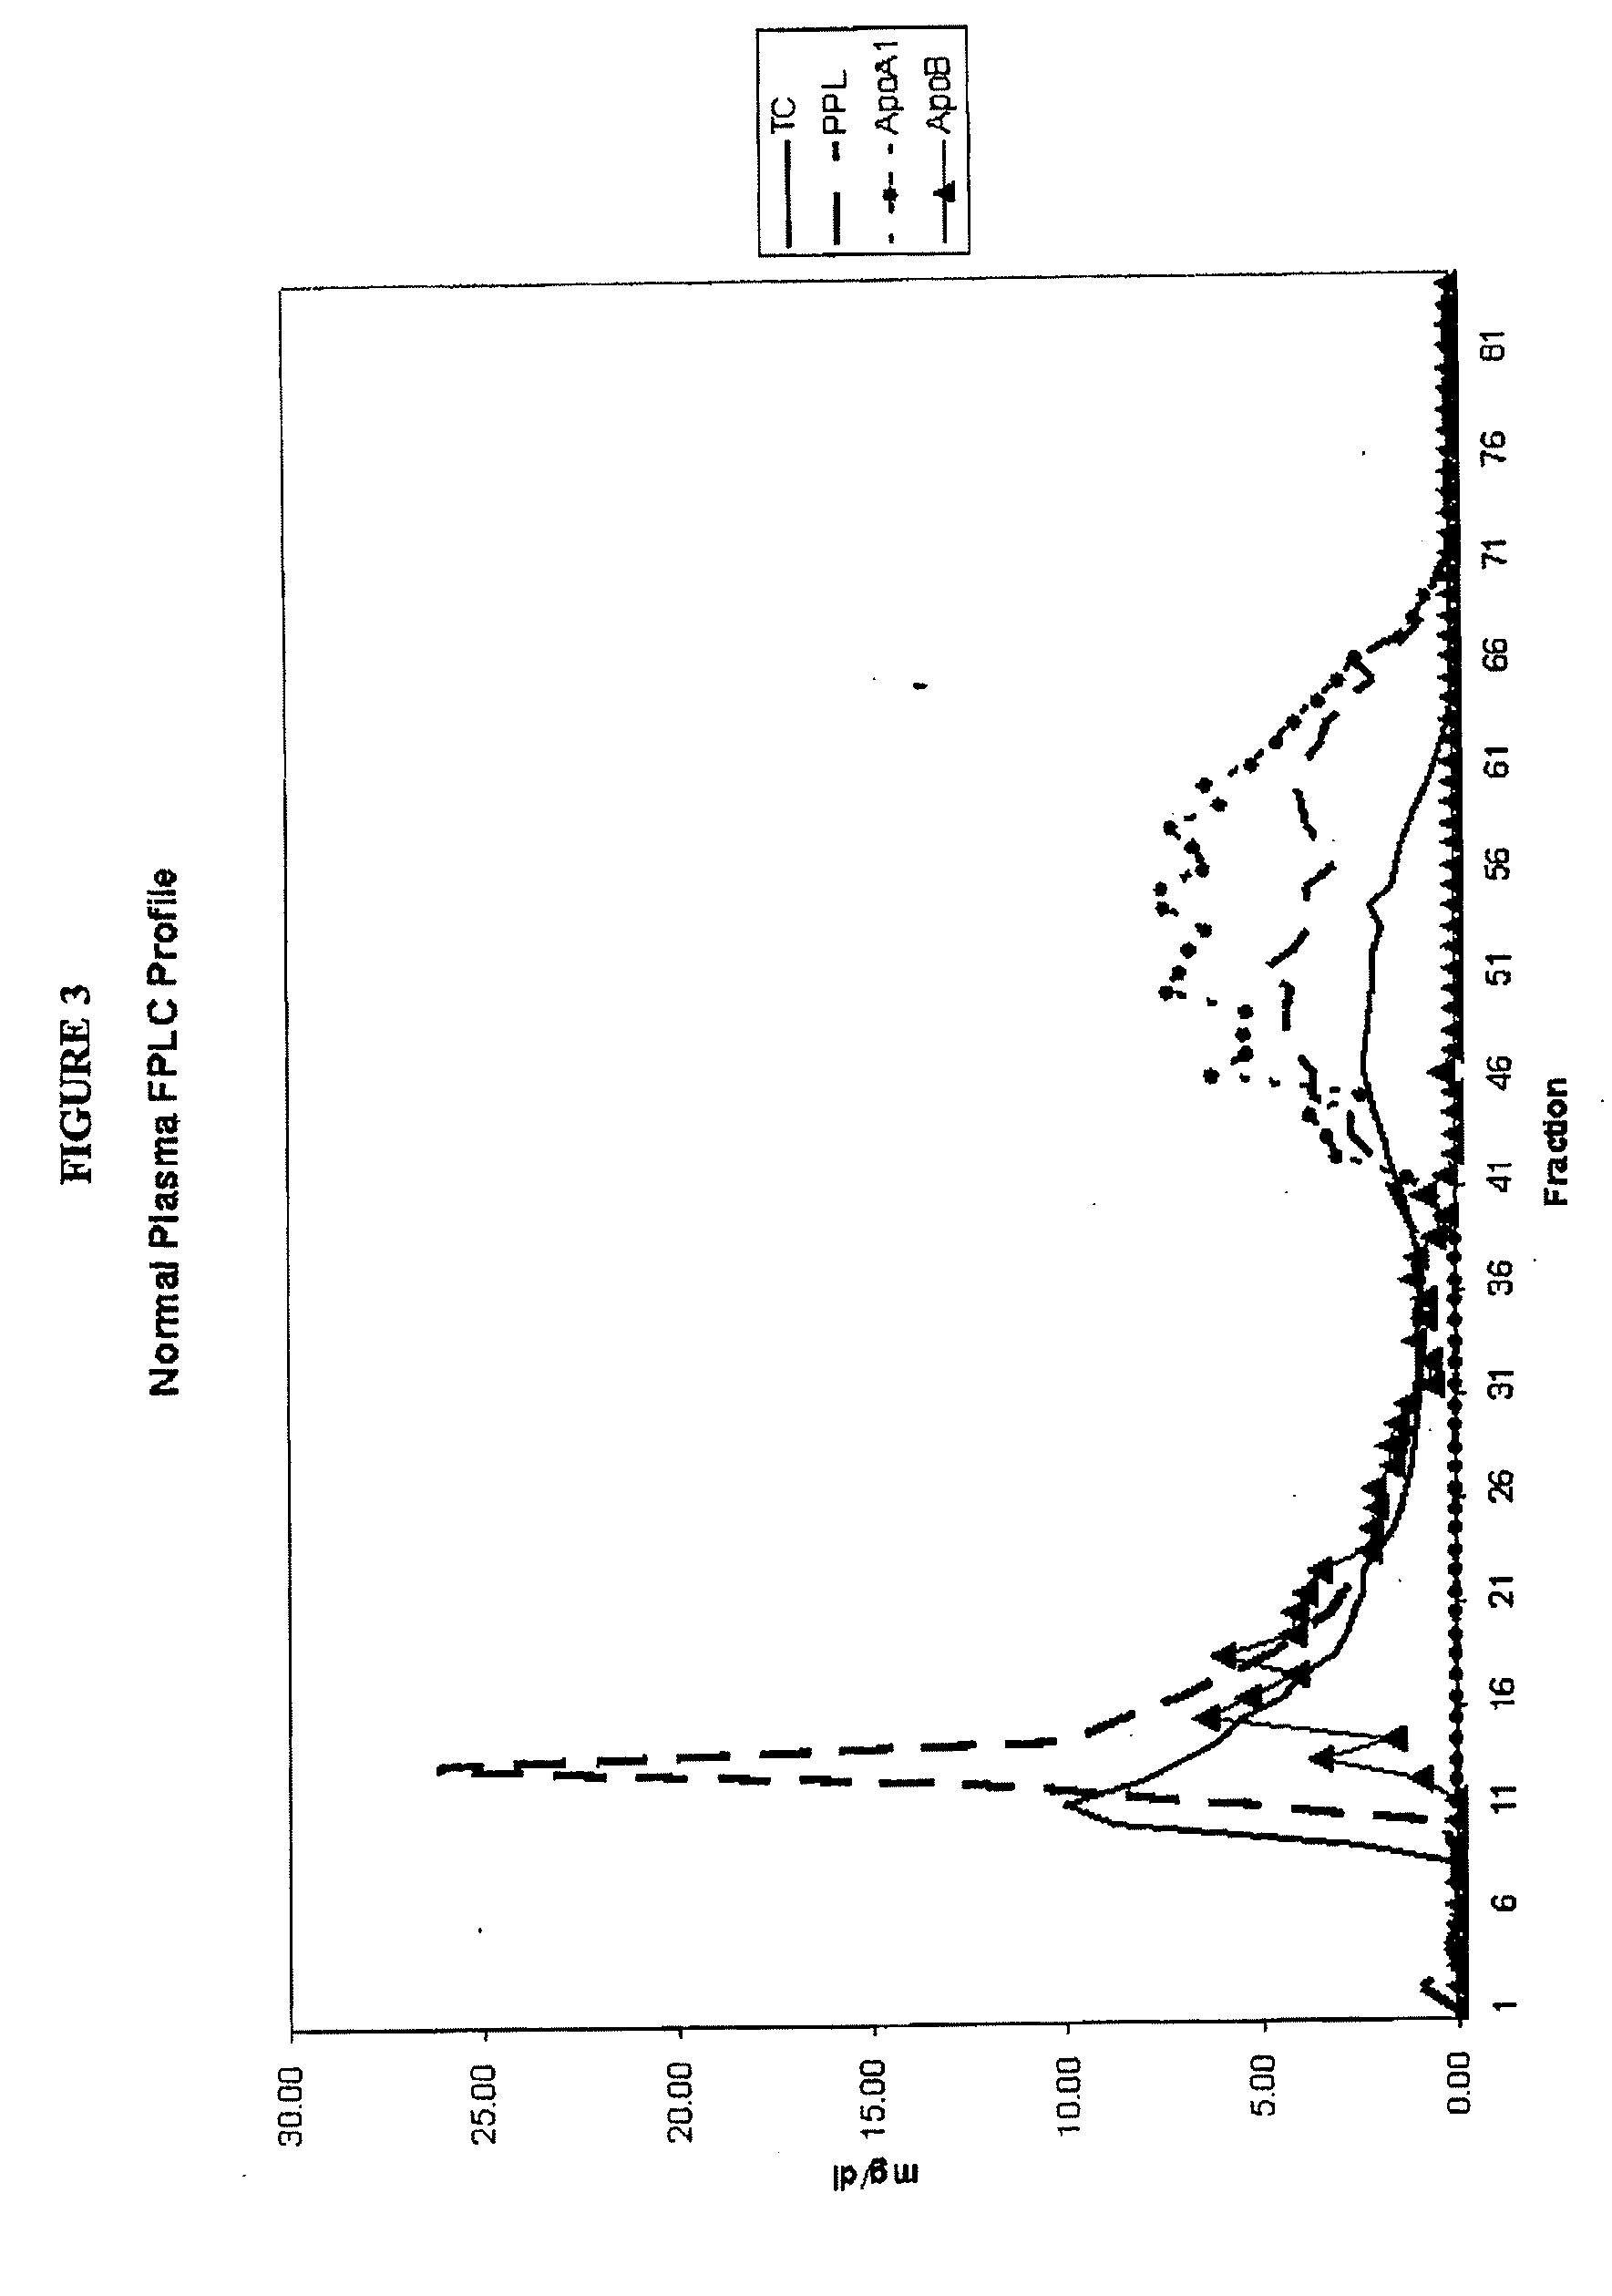 Methods and Apparatus for Creating Particle Derivatives of HDL with Reduced Lipid Content